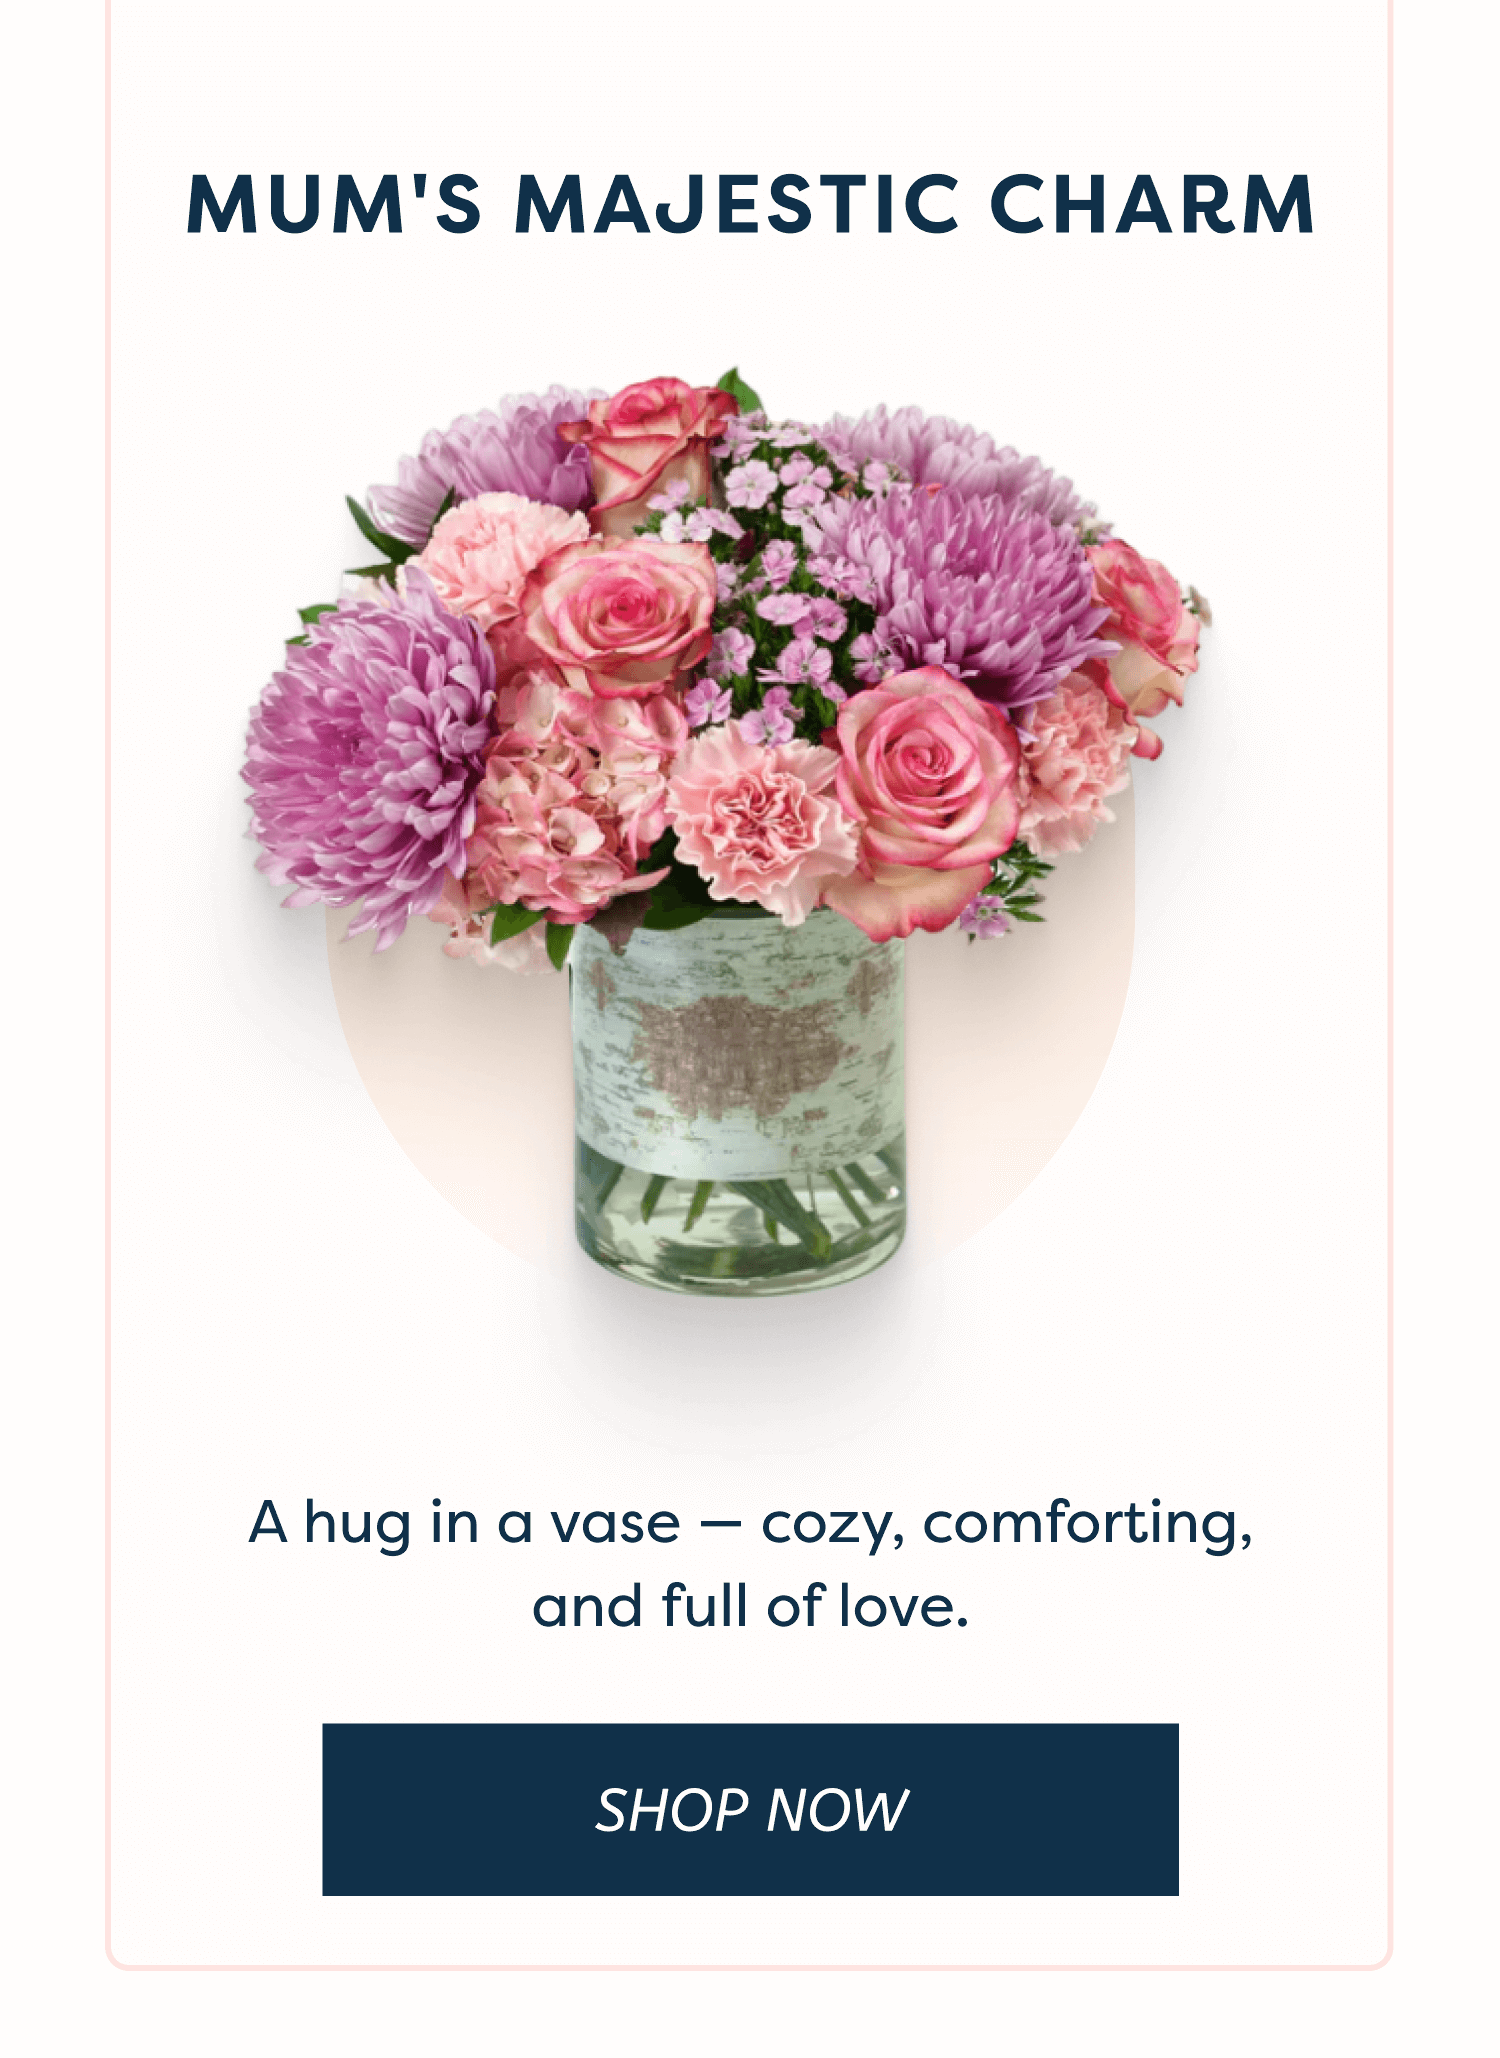 Mum's Majestic Charm A hug in a vase — cozy, comforting, and full of love. [ Shop Now ]